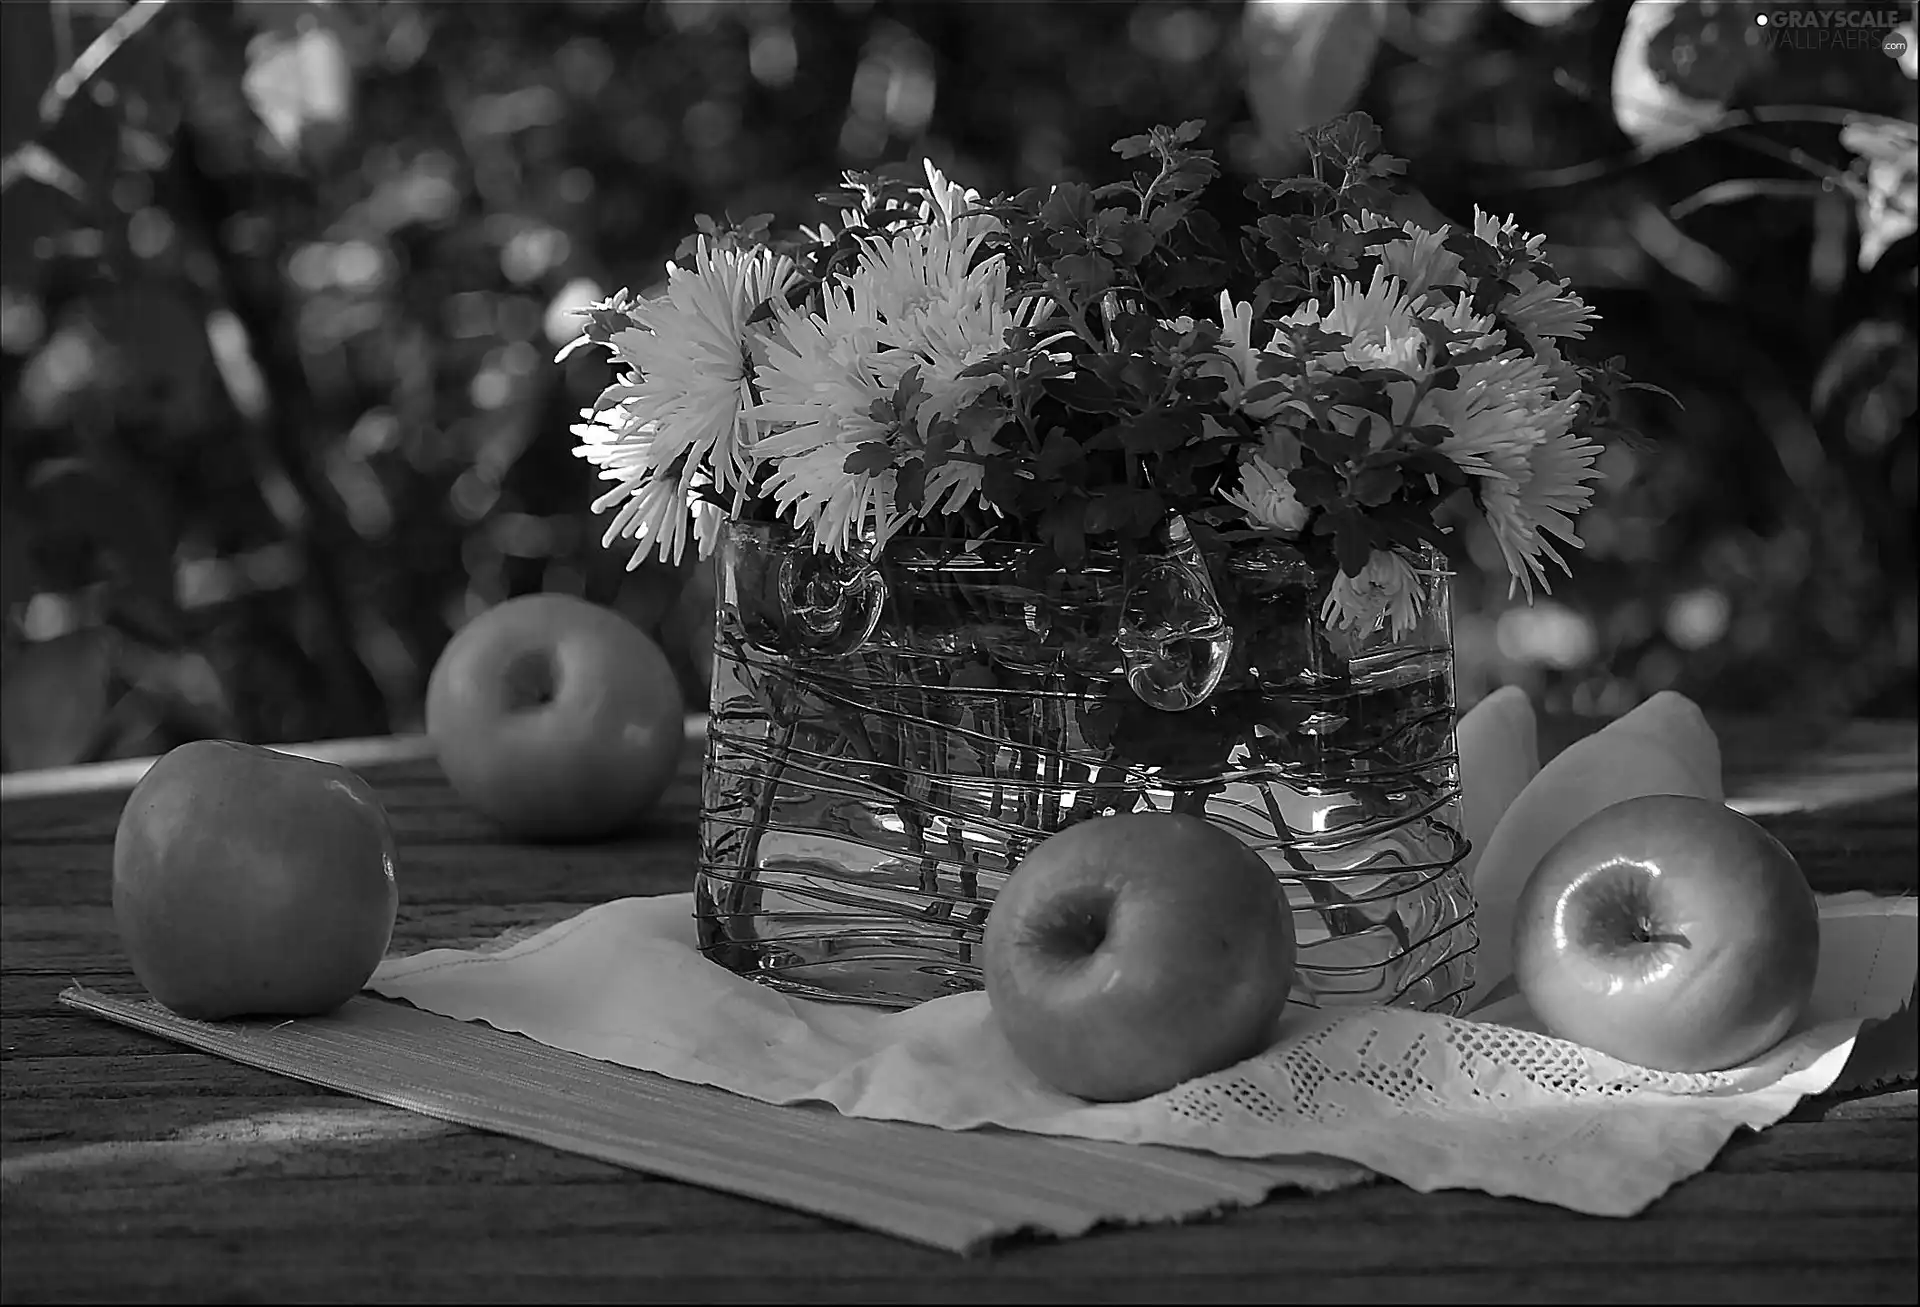 White, apples, composition, Chrysanthemums